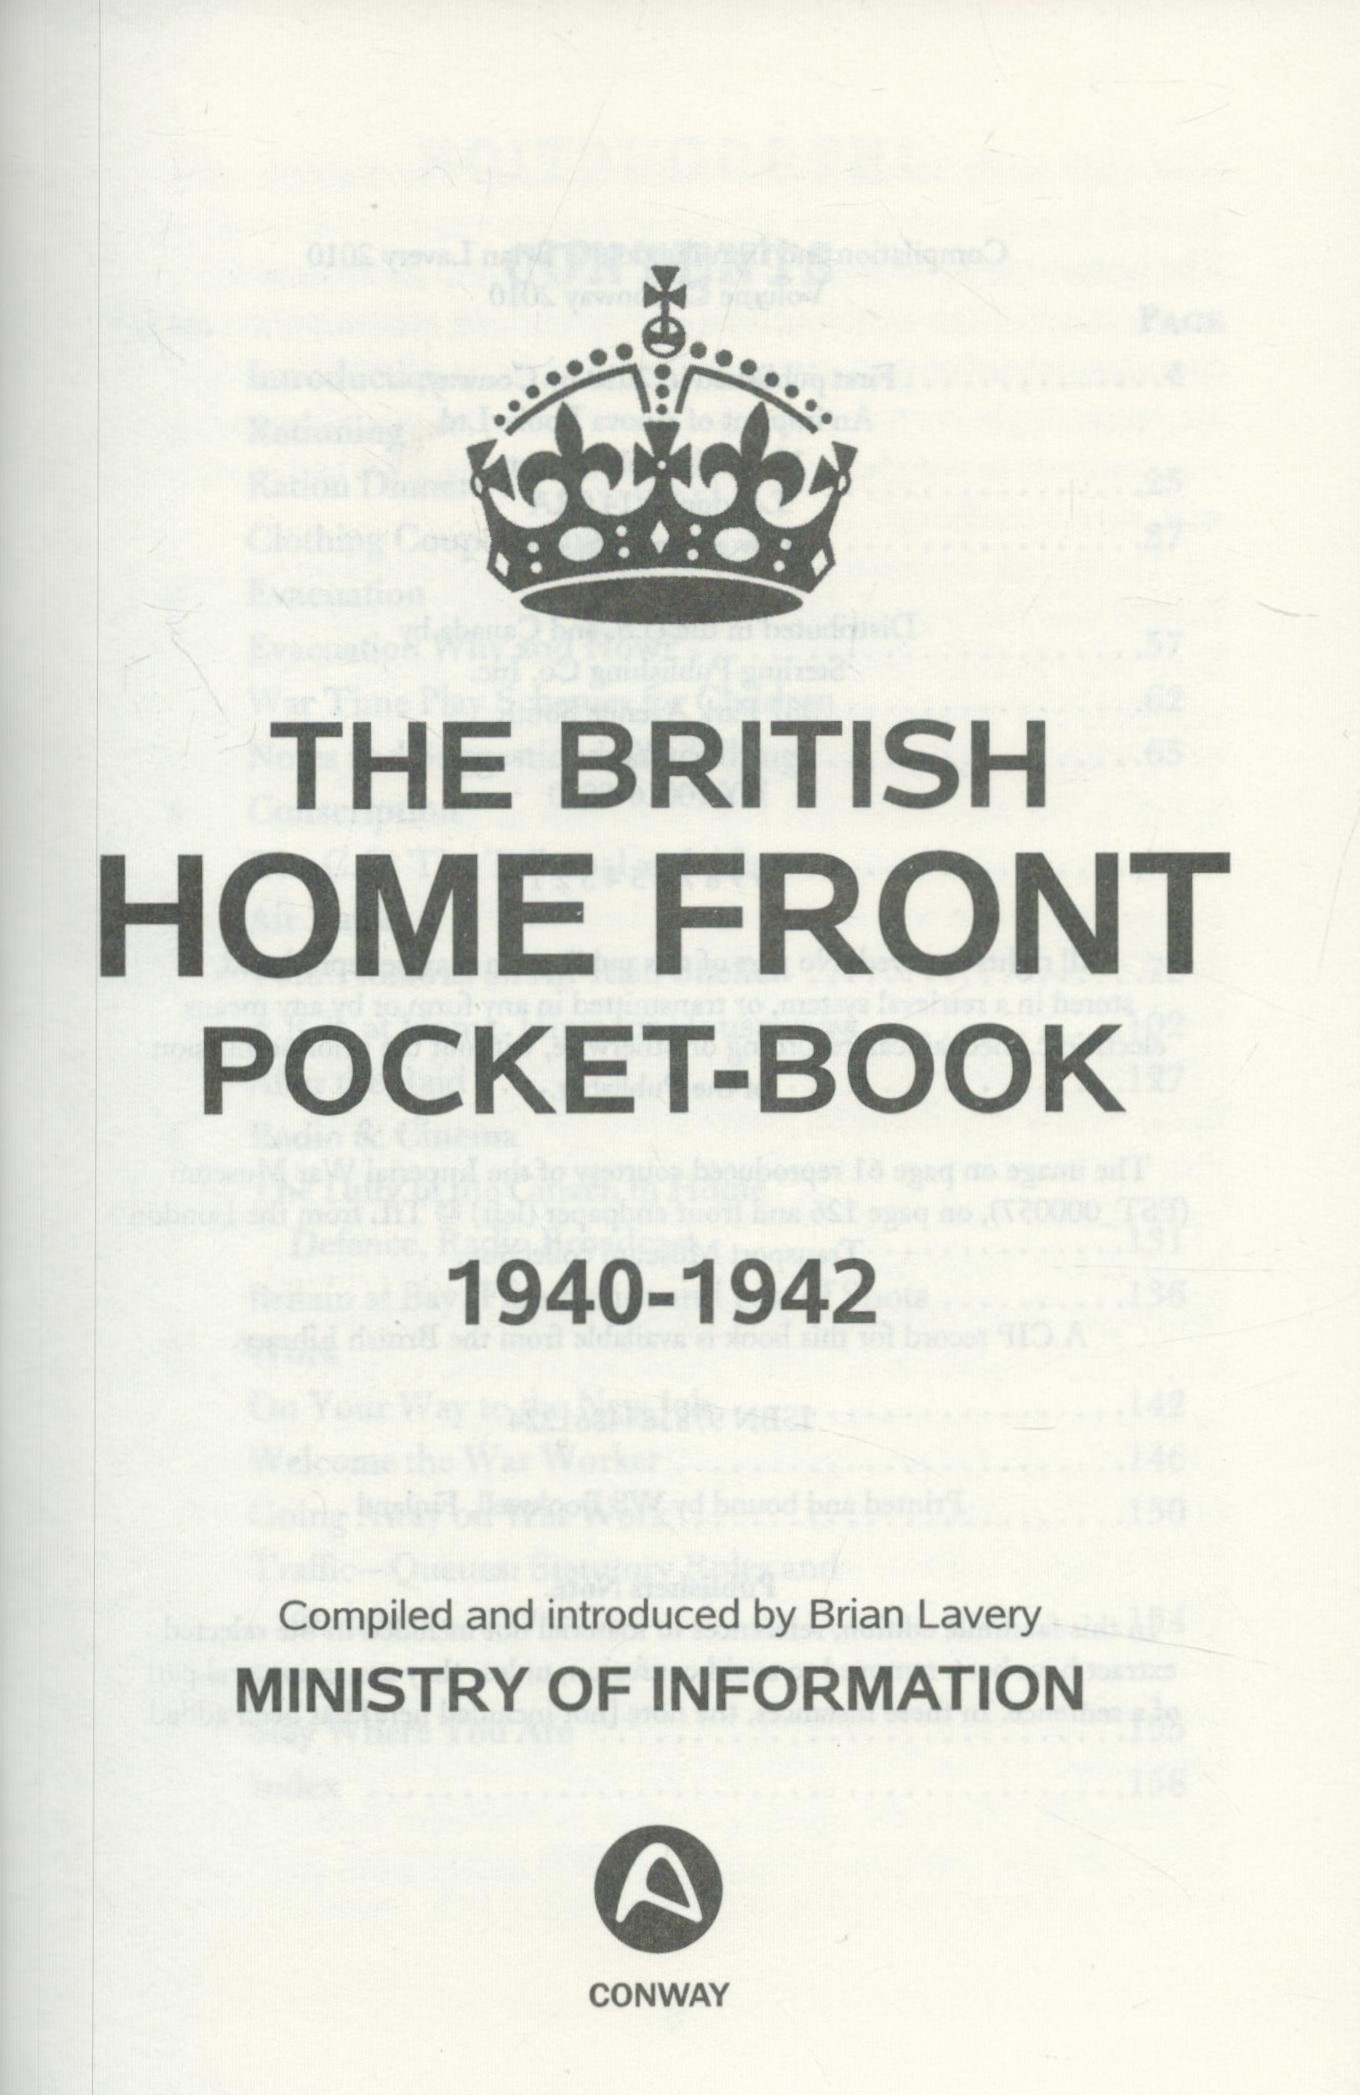 Brian Lavery Hardback Book titled The British Home Front Pocketbook 1940-1942. First Edition, - Image 2 of 3